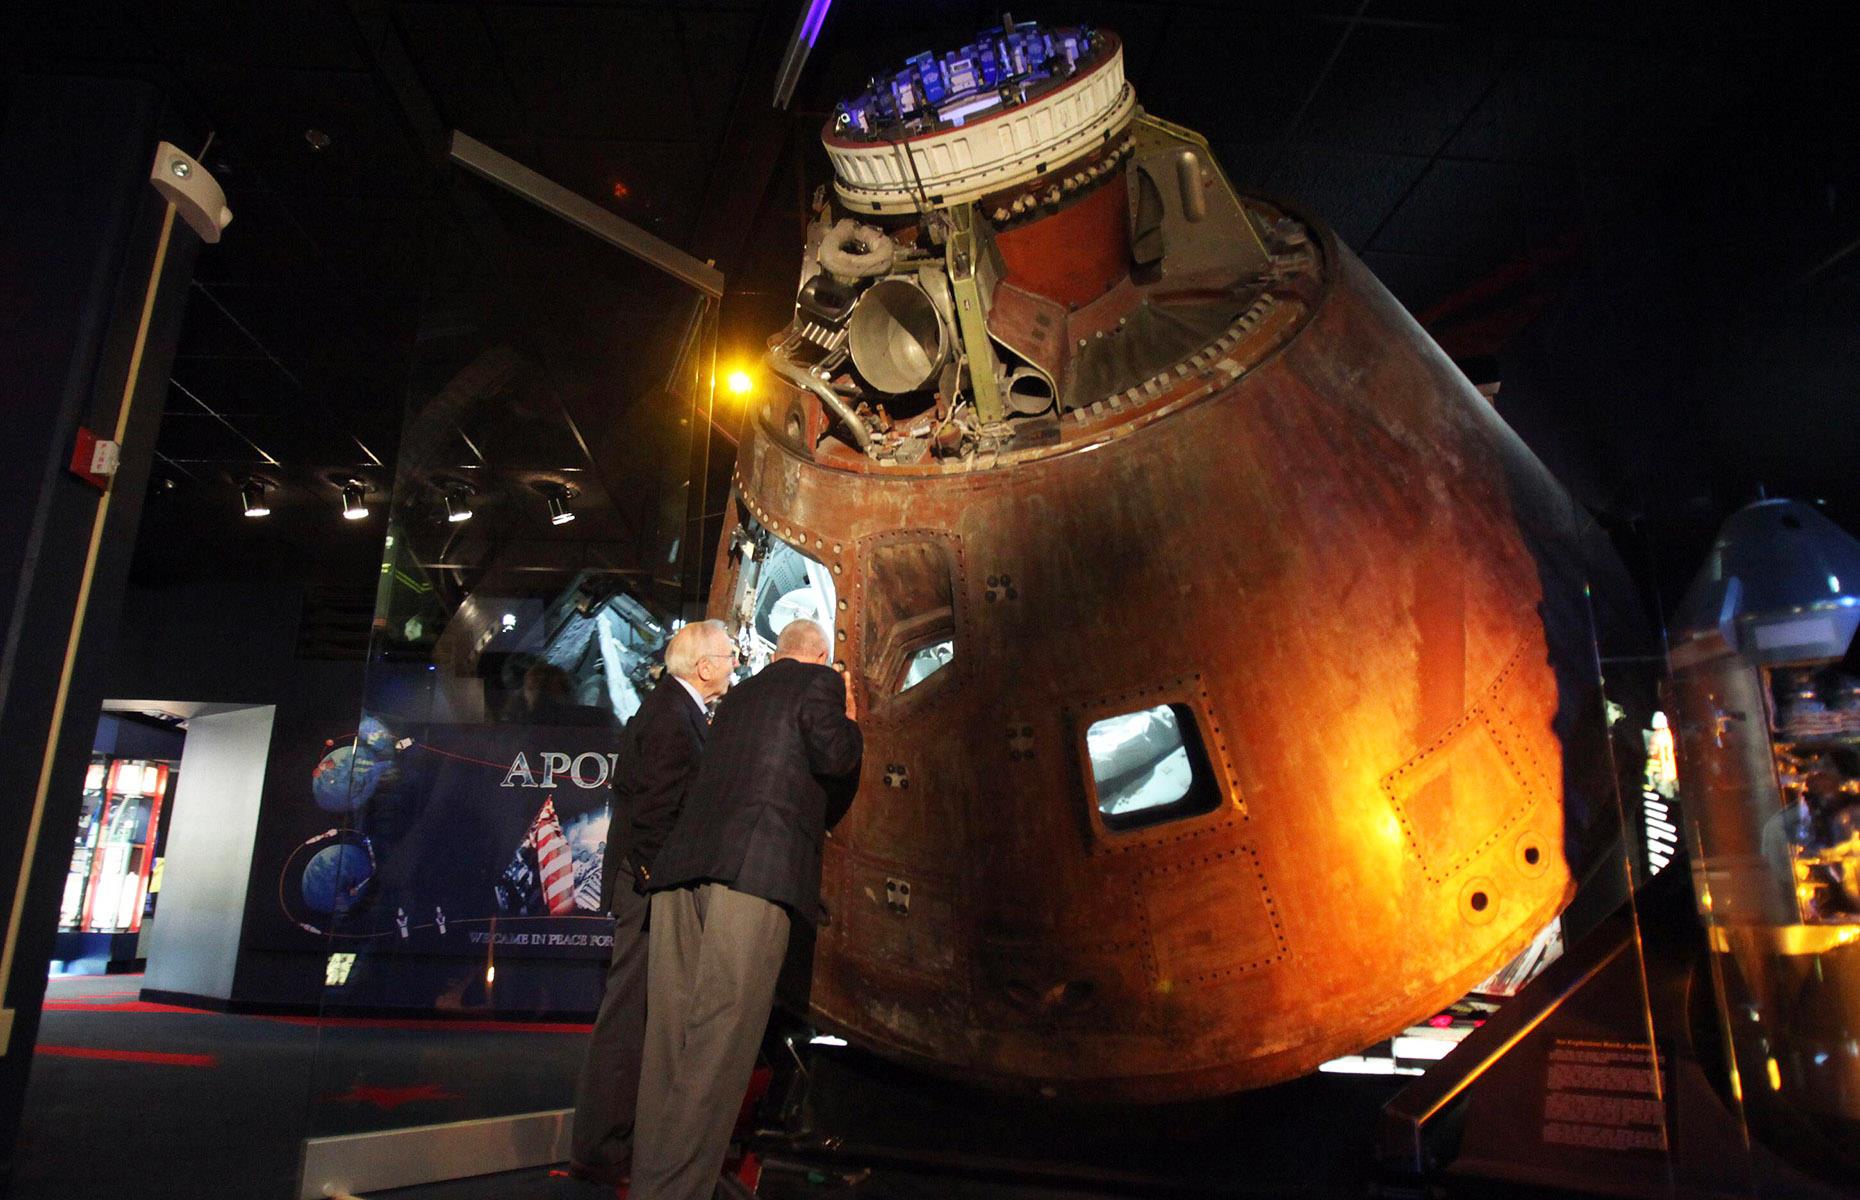 <p>Against all the odds, the crew of the Apollo 13 mission managed to get back to Earth in one piece following a catastrophic oxygen tank explosion in its command module, the Odyssey. The US spacecraft splashed down in the South Pacific Ocean on April 17, 1970 and now resides at the Kansas Cosmosphere and Space Center. </p>  <p>This picture shows James Lovell Jr. and Fred Haise Jr., two of the three astronauts onboard the stricken craft, peering inside the restored module.</p>